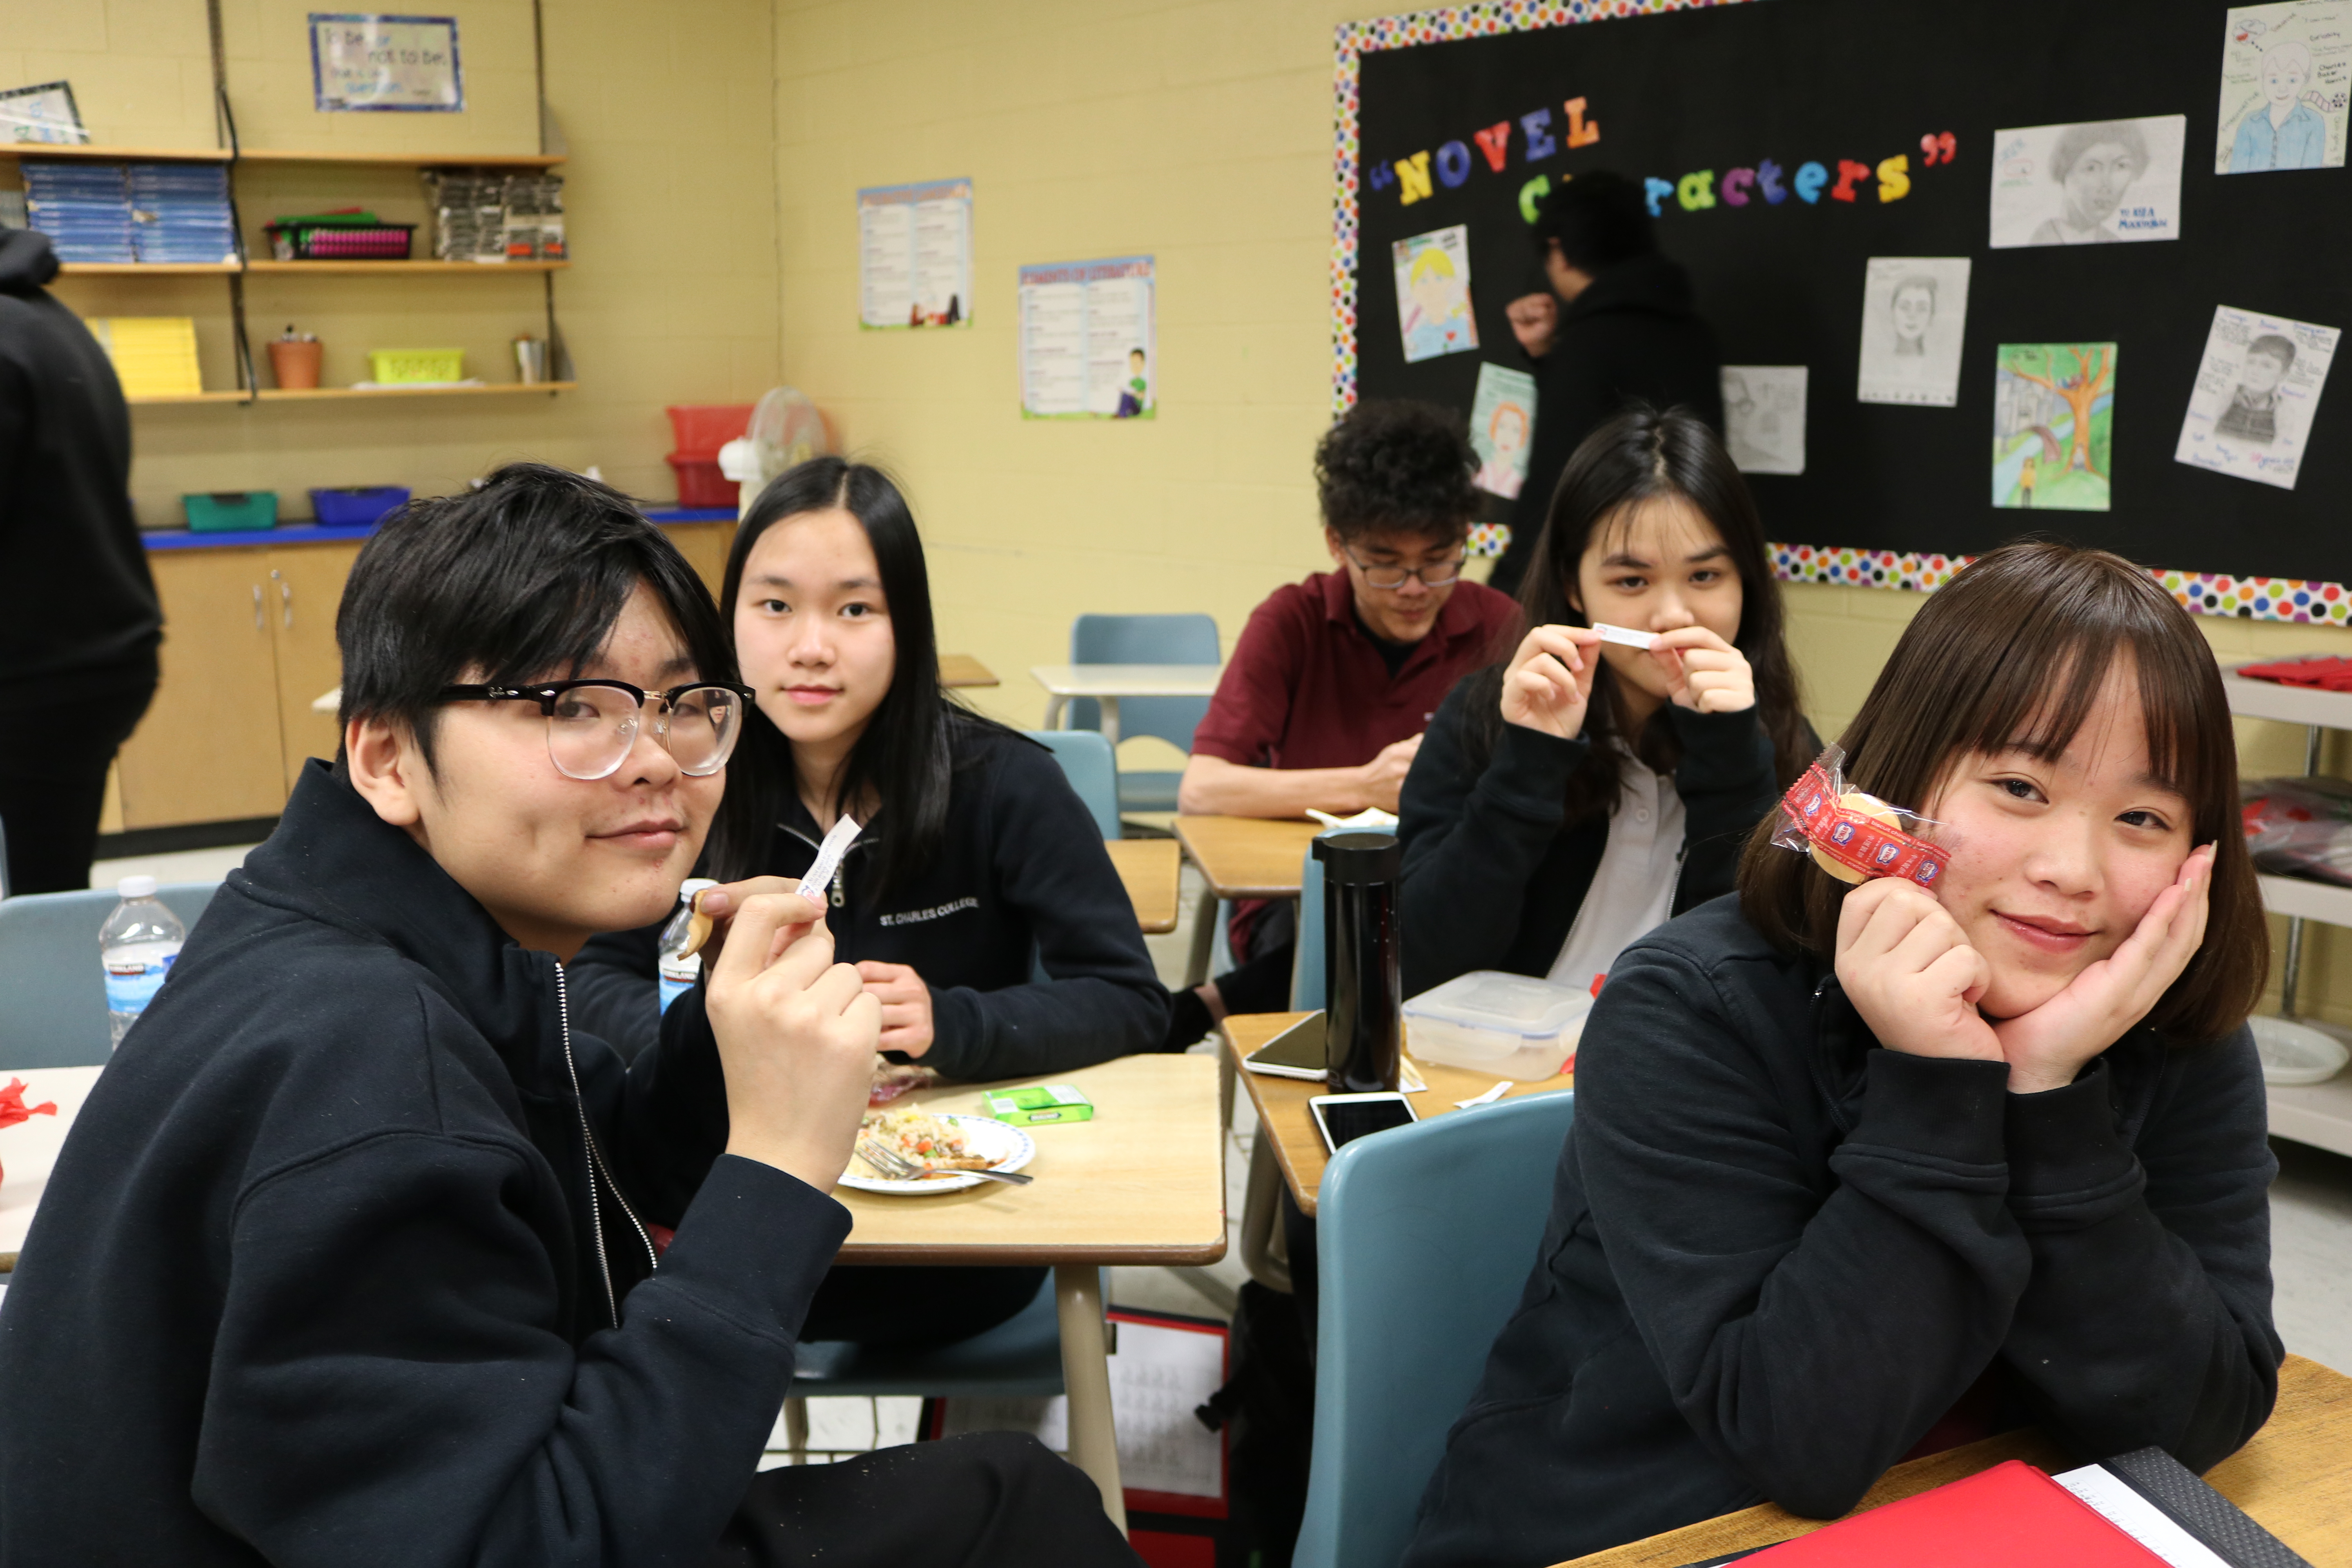 Chinese Students sit smiling as they feast on a traditional Chinese meal.